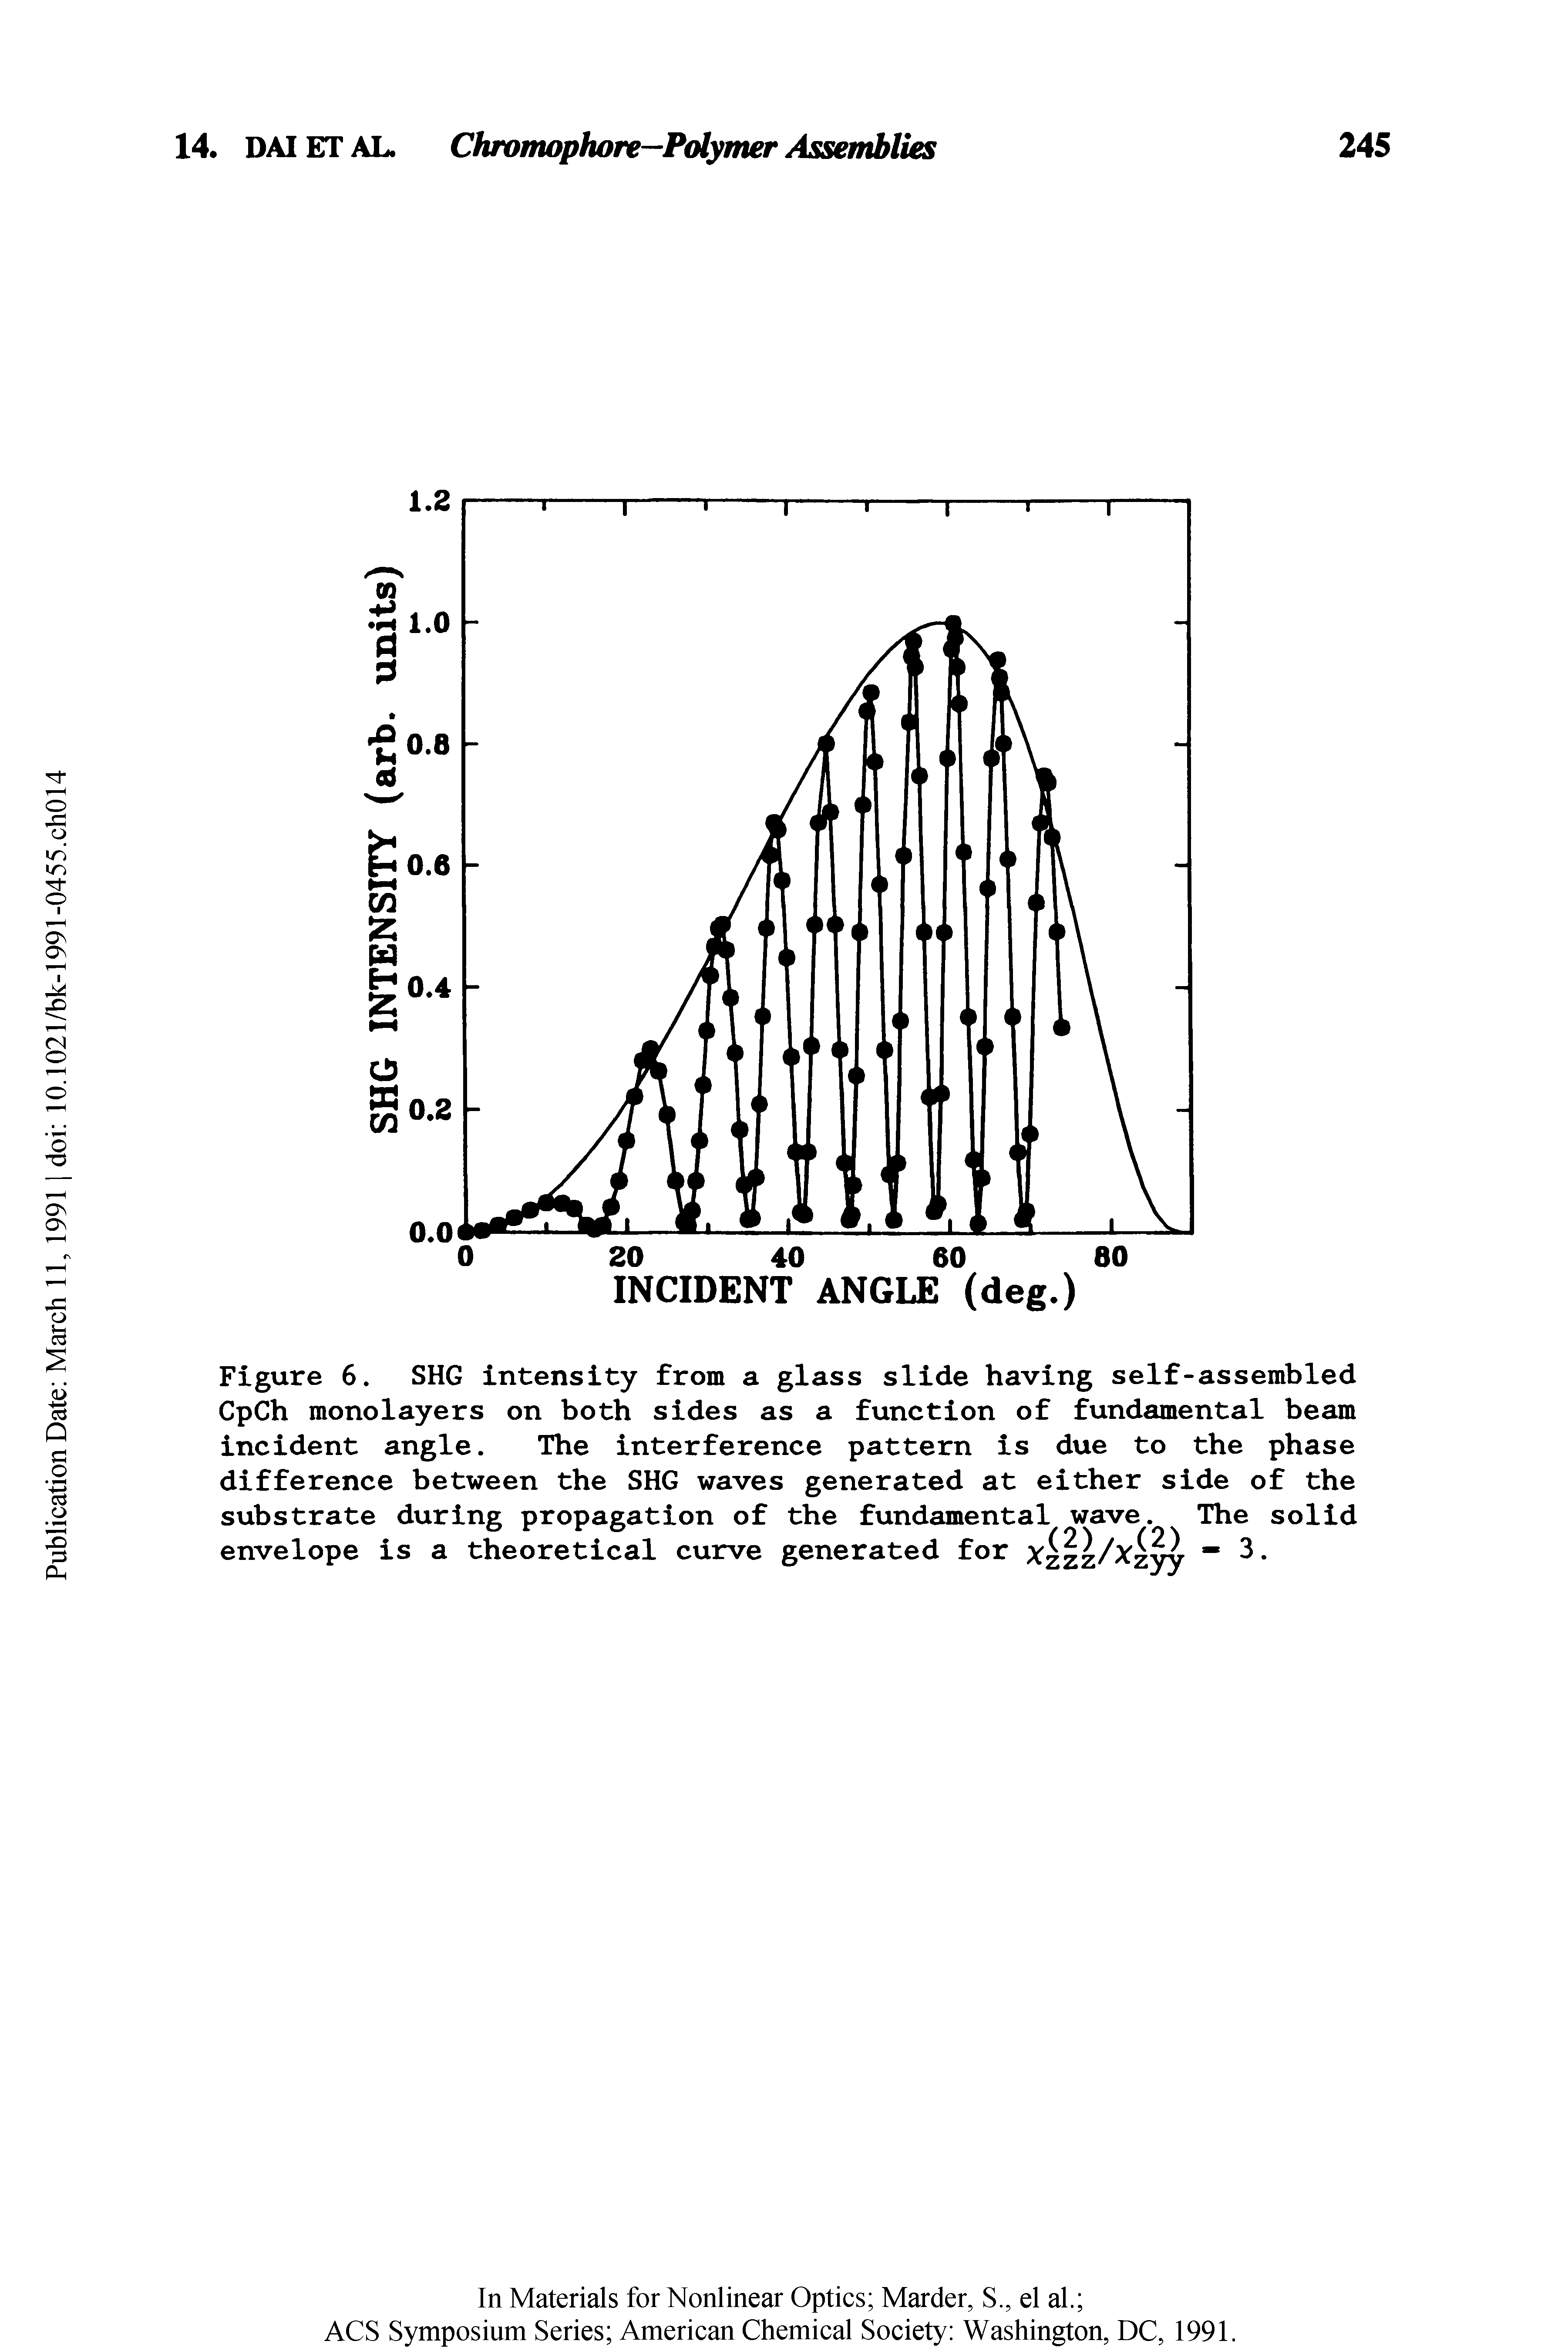 Figure 6. SHG intensity from a glass slide having self-assembled CpCh monolayers on both sides as a function of fundamental beam incident angle. The interference pattern is due to the phase difference between the SHG waves generated at either side of the substrate during propagation of the fundamental wave. The solid envelope is a theoretical curve generated for Xzzz/ zyy " 3-...